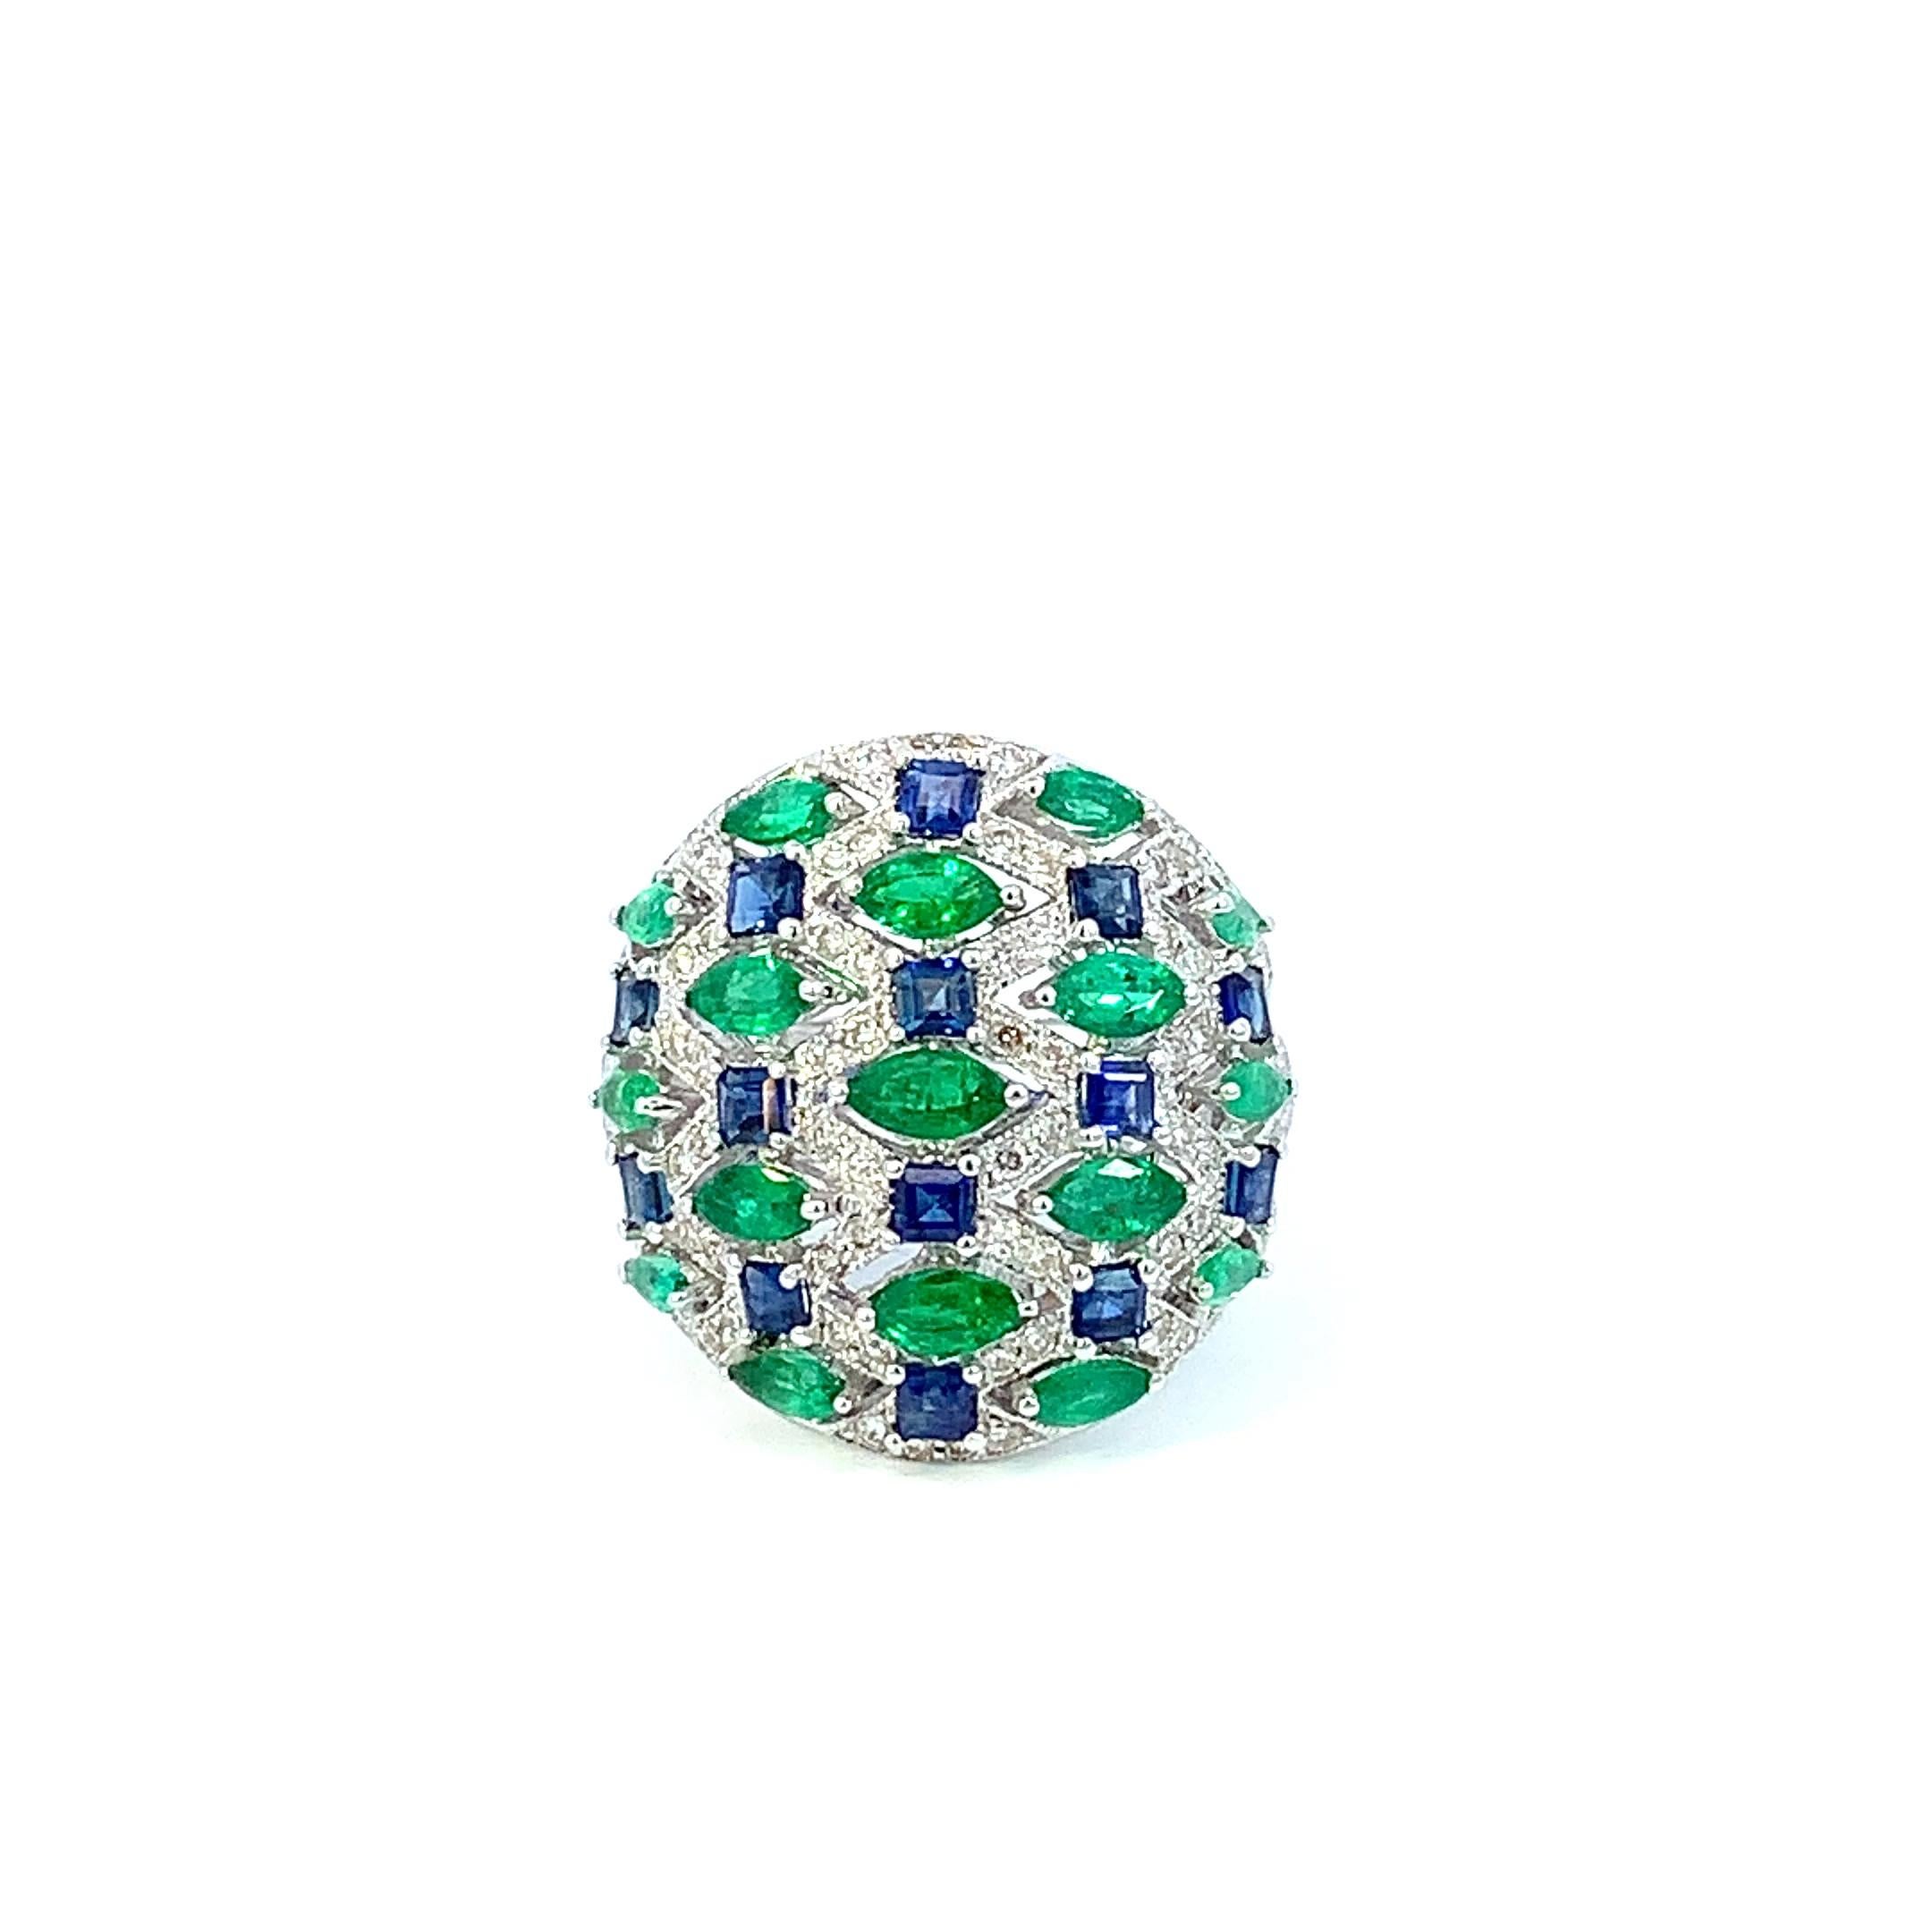 Elevate your style with this exquisite 18K White Gold Ring, meticulously crafted to showcase the mesmerizing beauty of diamonds, emeralds, and sapphires. With a total carat weight of 1.4 carats in diamonds, 2.8 carats in emeralds and sapphires